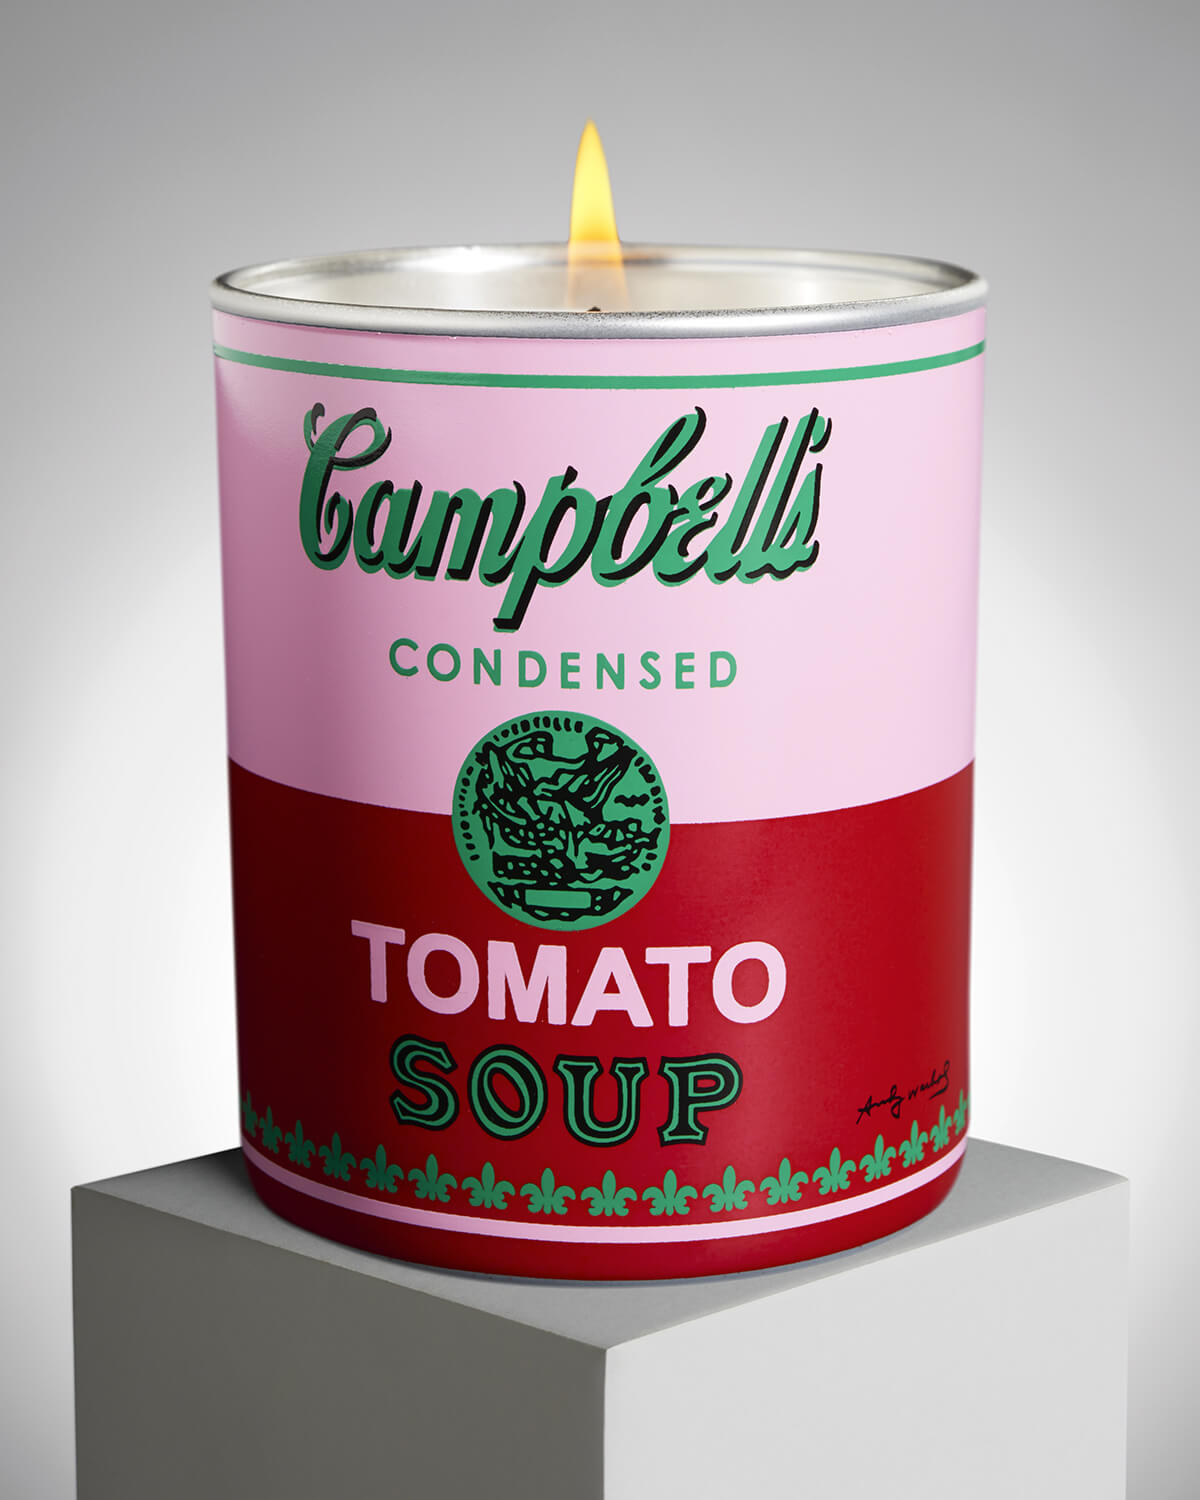 Andy Warhol "Campbell" Perfumed Candle - Tomato Leaf Scented 售價： HKD 390